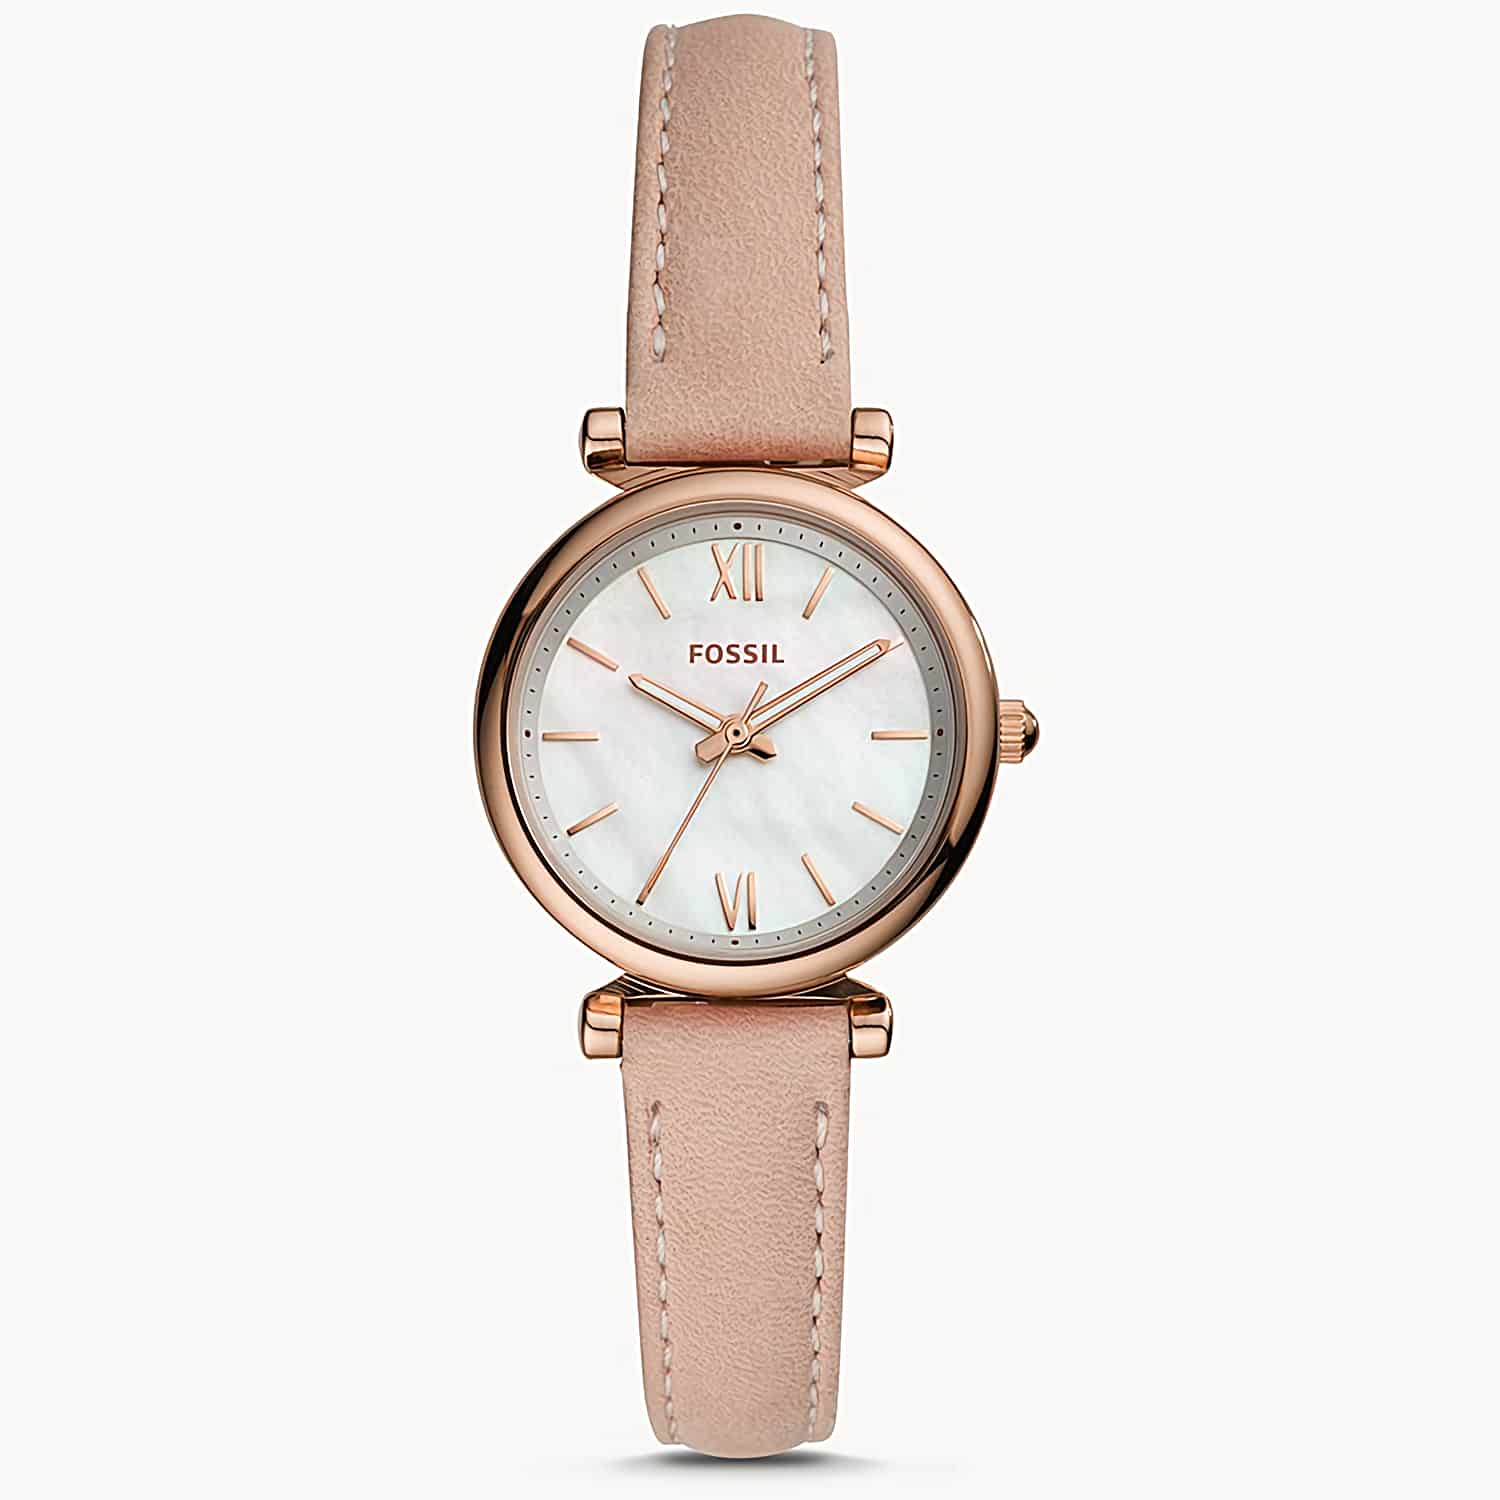 ES4699 Fossil Carlie Mini Nude Watch. Absolutely eye-catching, this women’s analogue watch from the House of Fossil which acts as the statement piece if you want to give yourself a refined look. A sturdy in timeless glamour, this Carlie Mini-series watch 